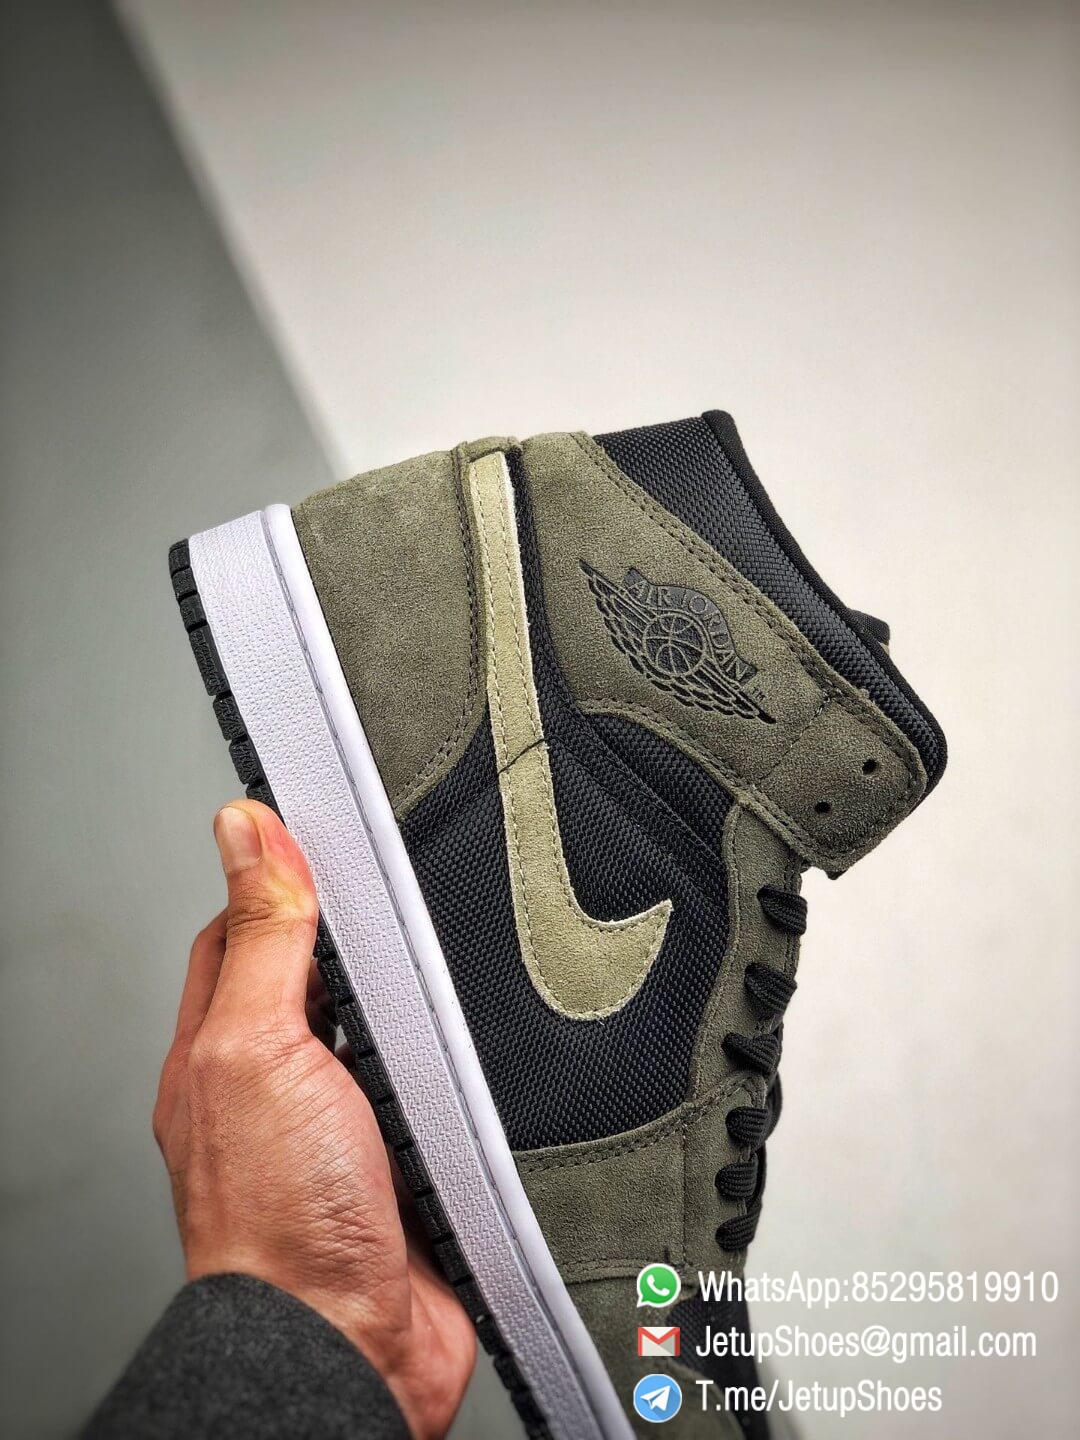 The Nike Wmns Air Jordan 1 Mid Olive Black Mesh Underlay Olive Tan Suede Overlay Repshoes 05